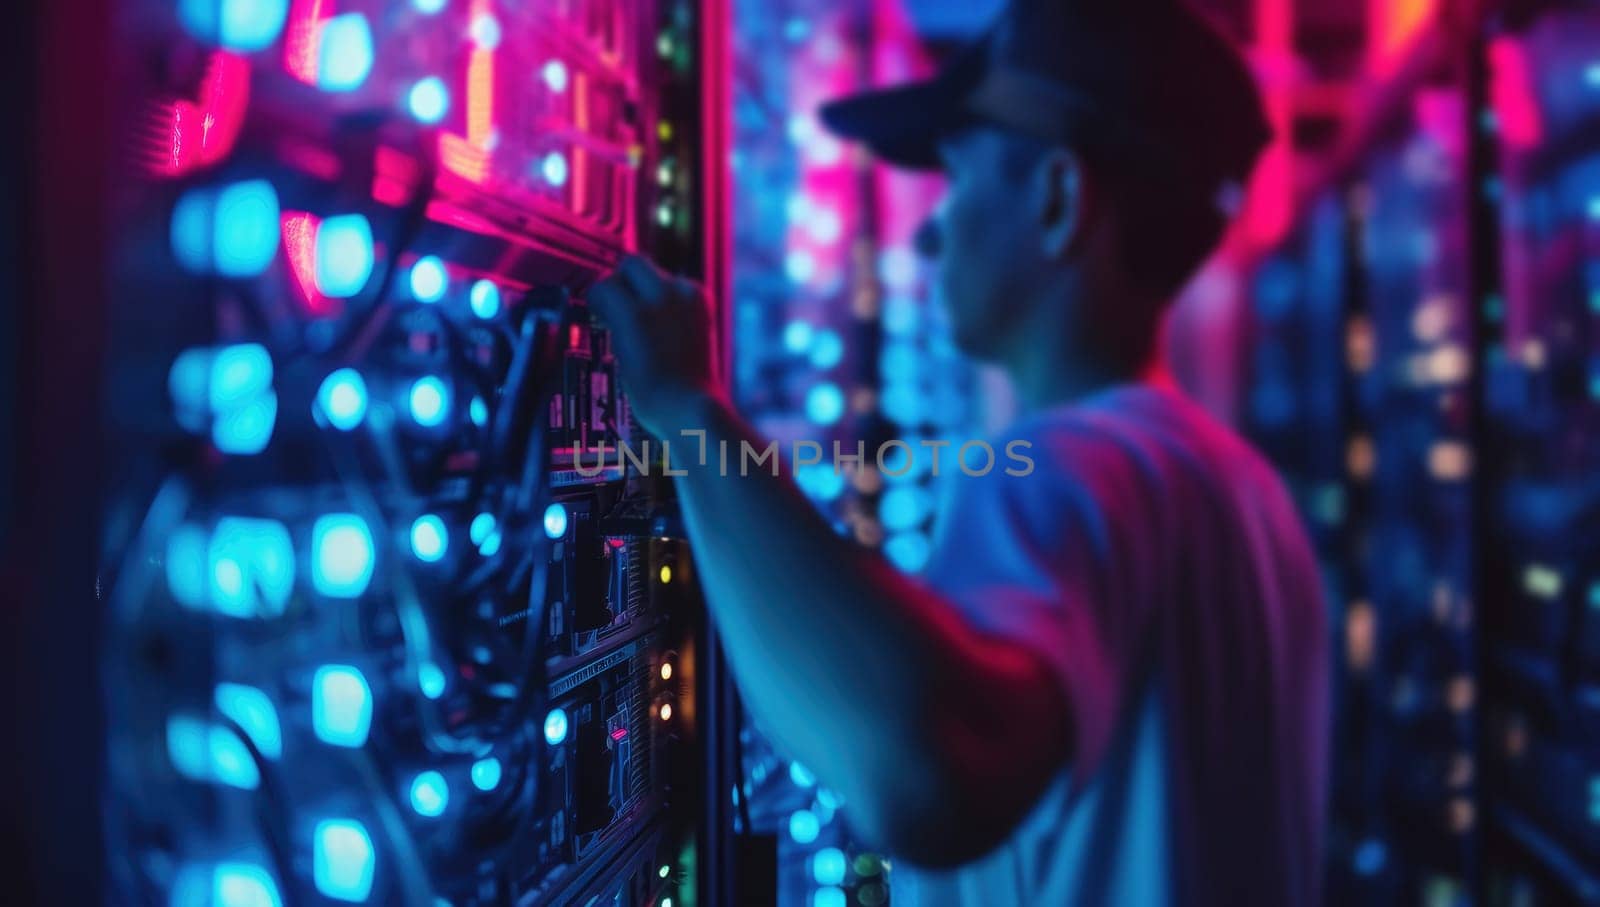 Professional man maintaining servers in a data center by ailike